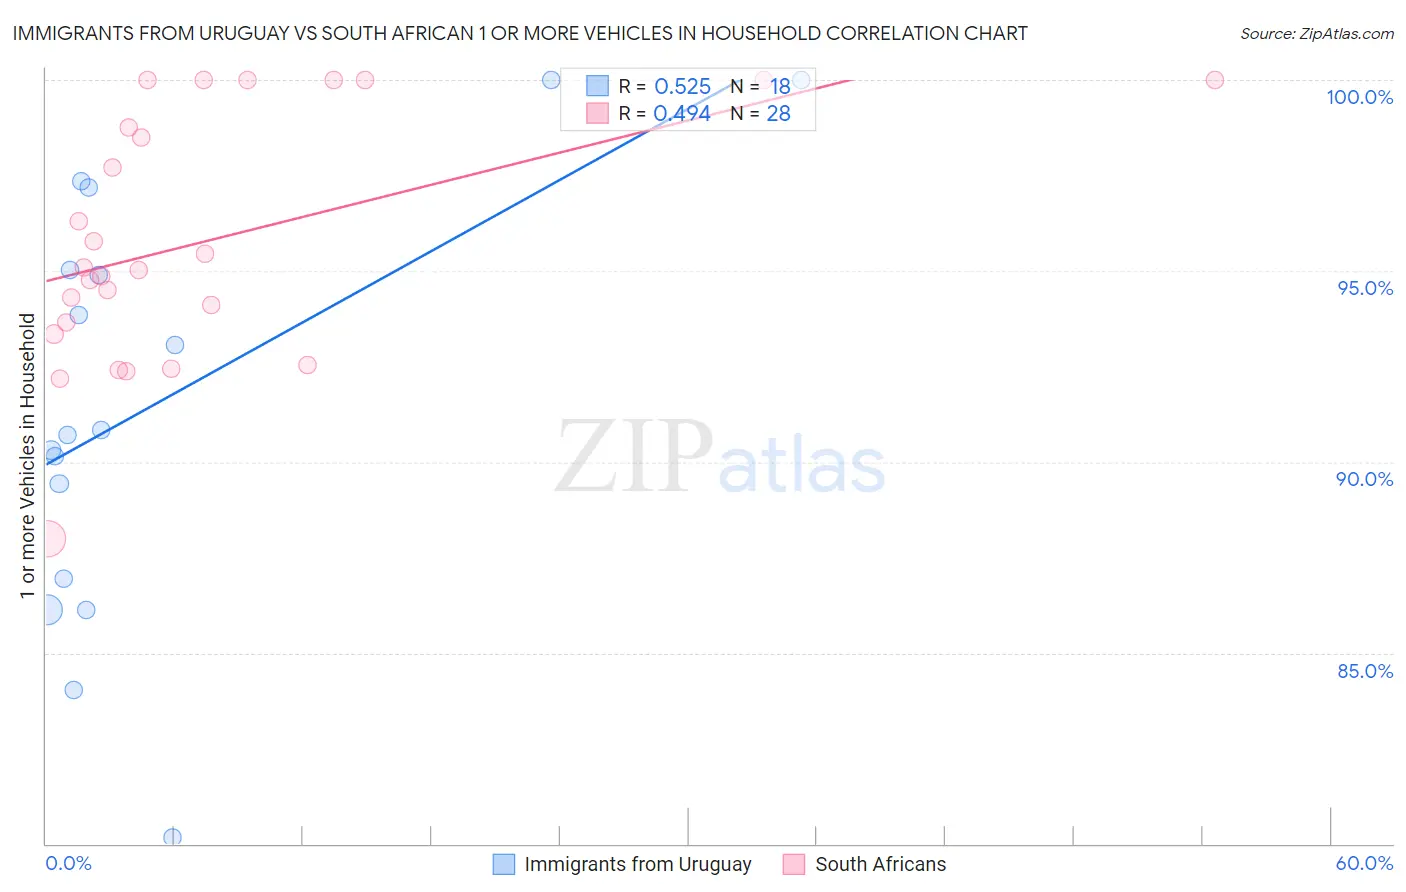 Immigrants from Uruguay vs South African 1 or more Vehicles in Household